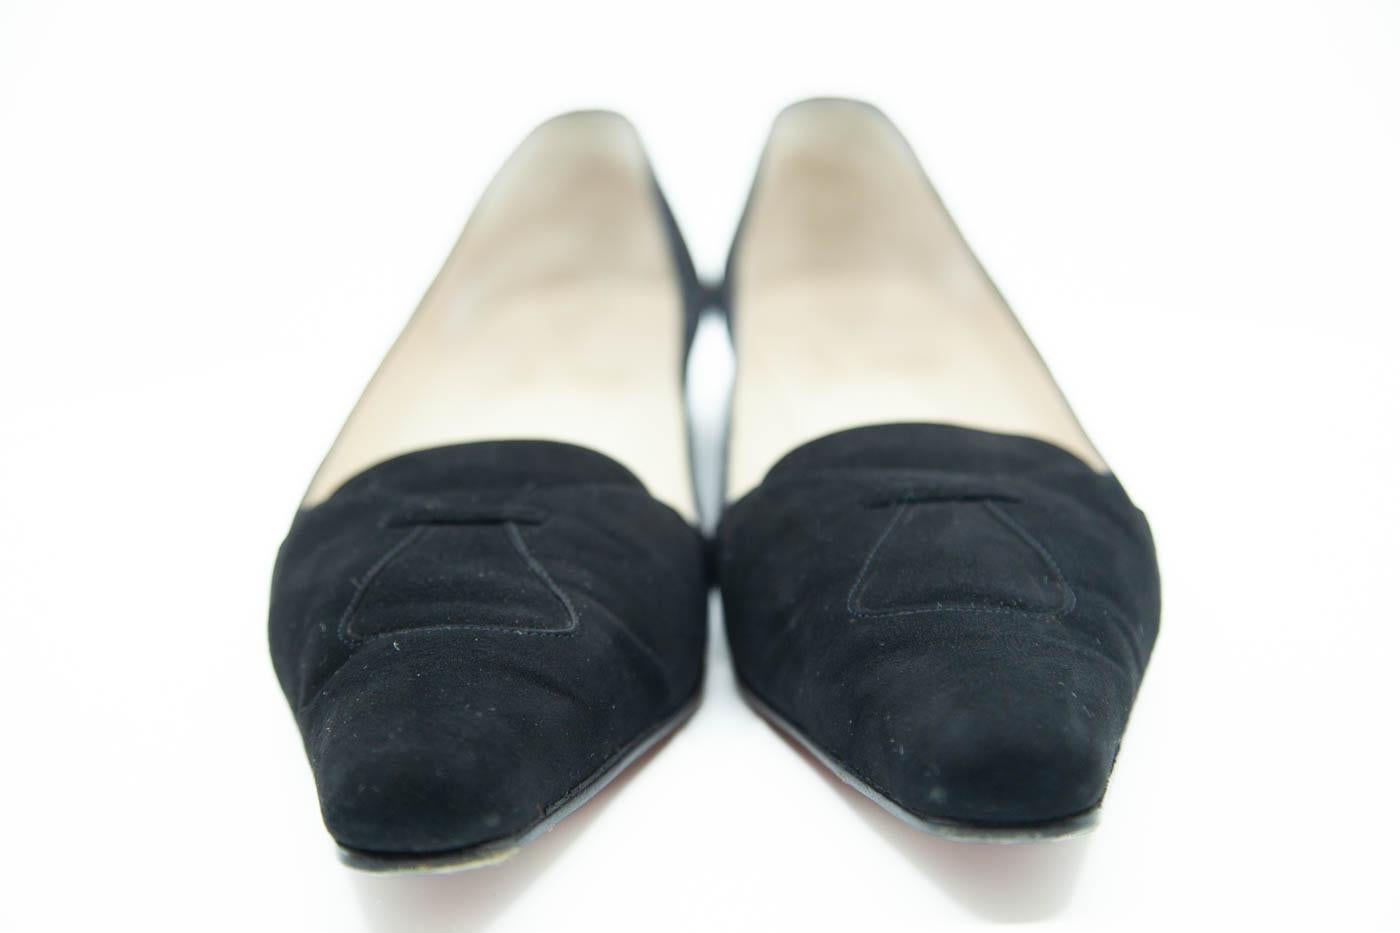  Louis Vuitton black ballerina flat with monogram canvas and include rounded toes, black leather ties with gold tone ends to the vamps and elastic backs, in size 38. Brand marked to insoles and soles.  Original box and dust bag
size 10 1/2